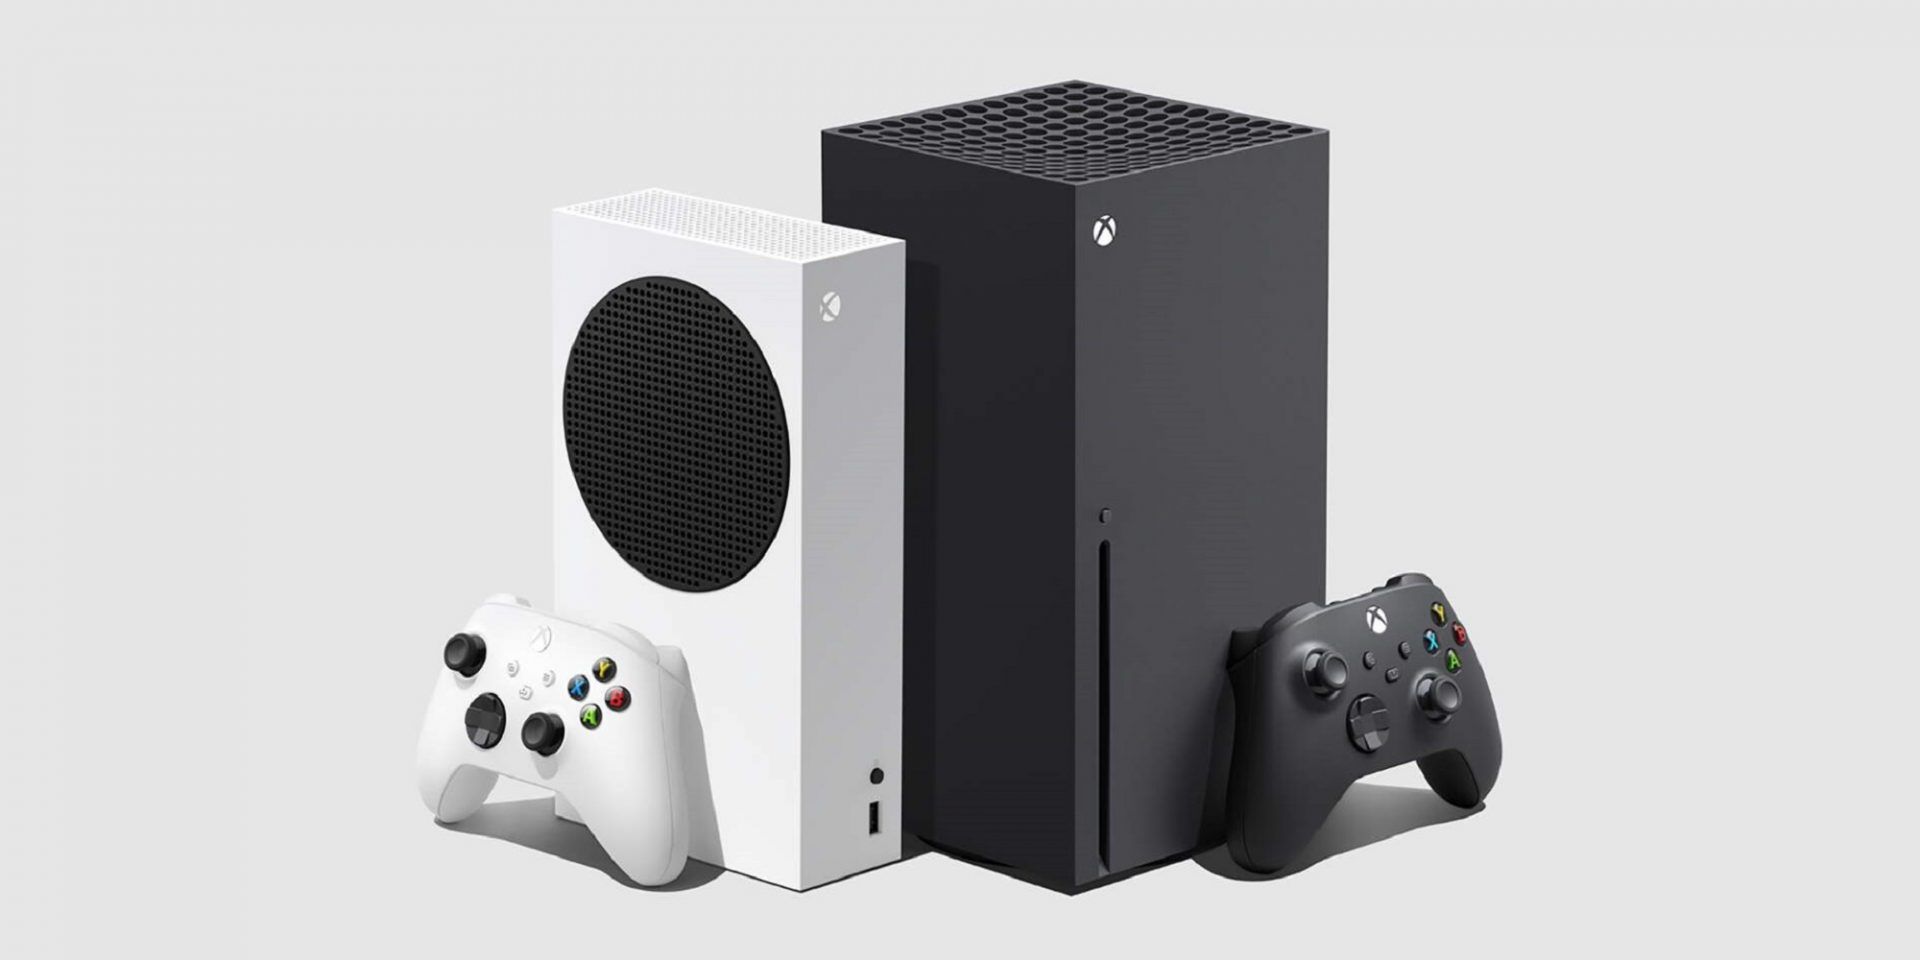 Xbox Series S and X Facing Away From Each Other In Gray Background